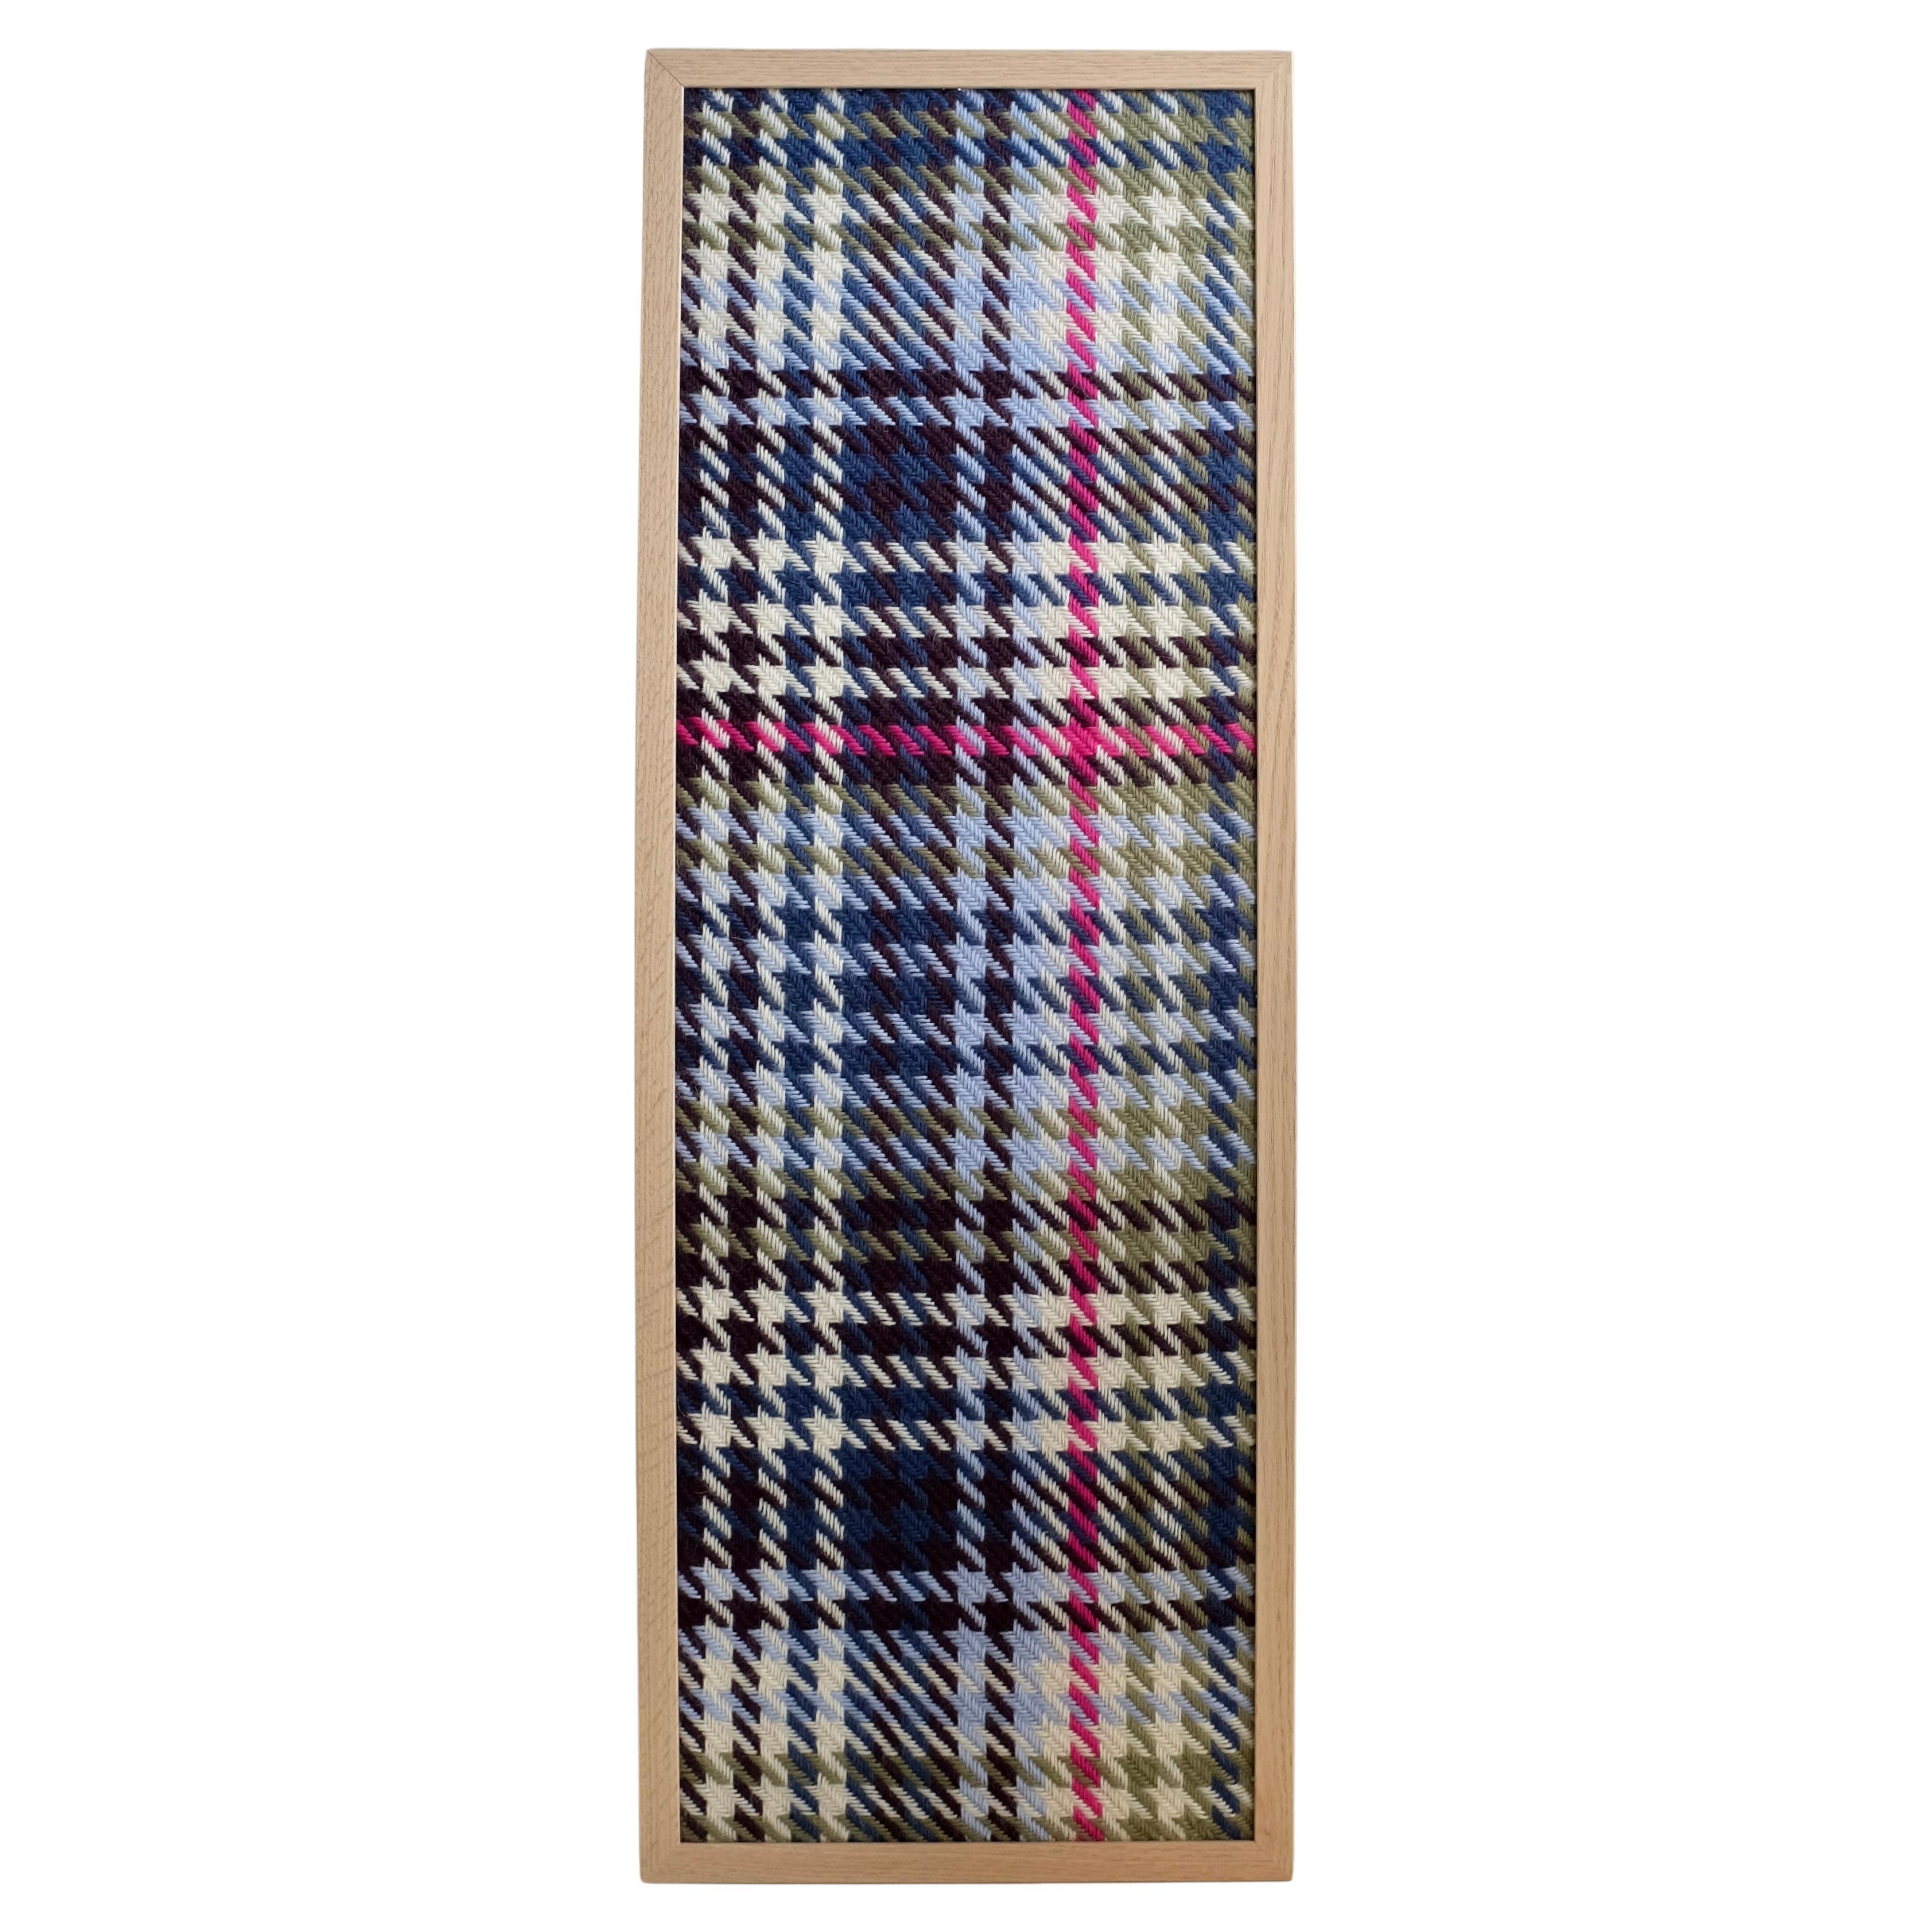 Hand Woven Wall Panel - "#101 - Pink Wensleydale" by Atelier Le Traon For Sale